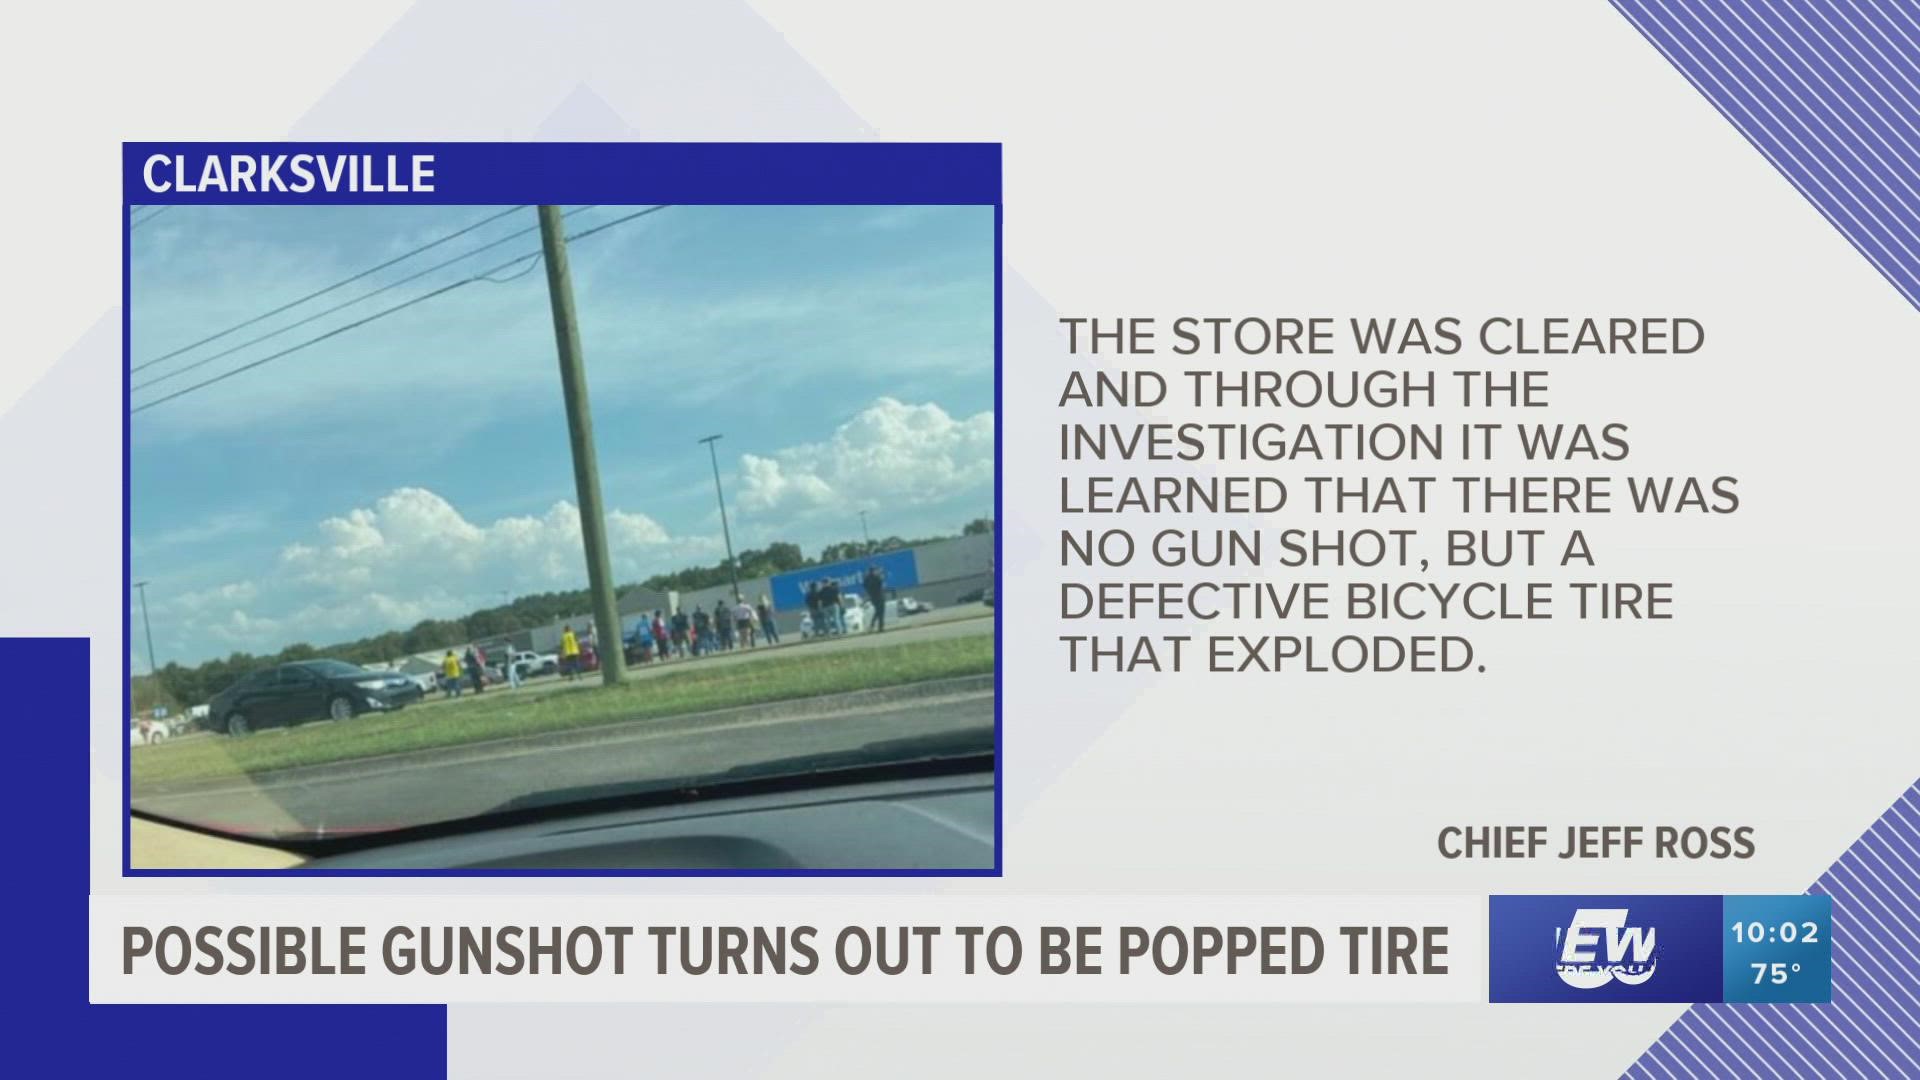 According to Clarksville Police, customers were evacuated from the Walmart located on Market Street after a loud pop was heard inside the building Saturday (Sept. 4)